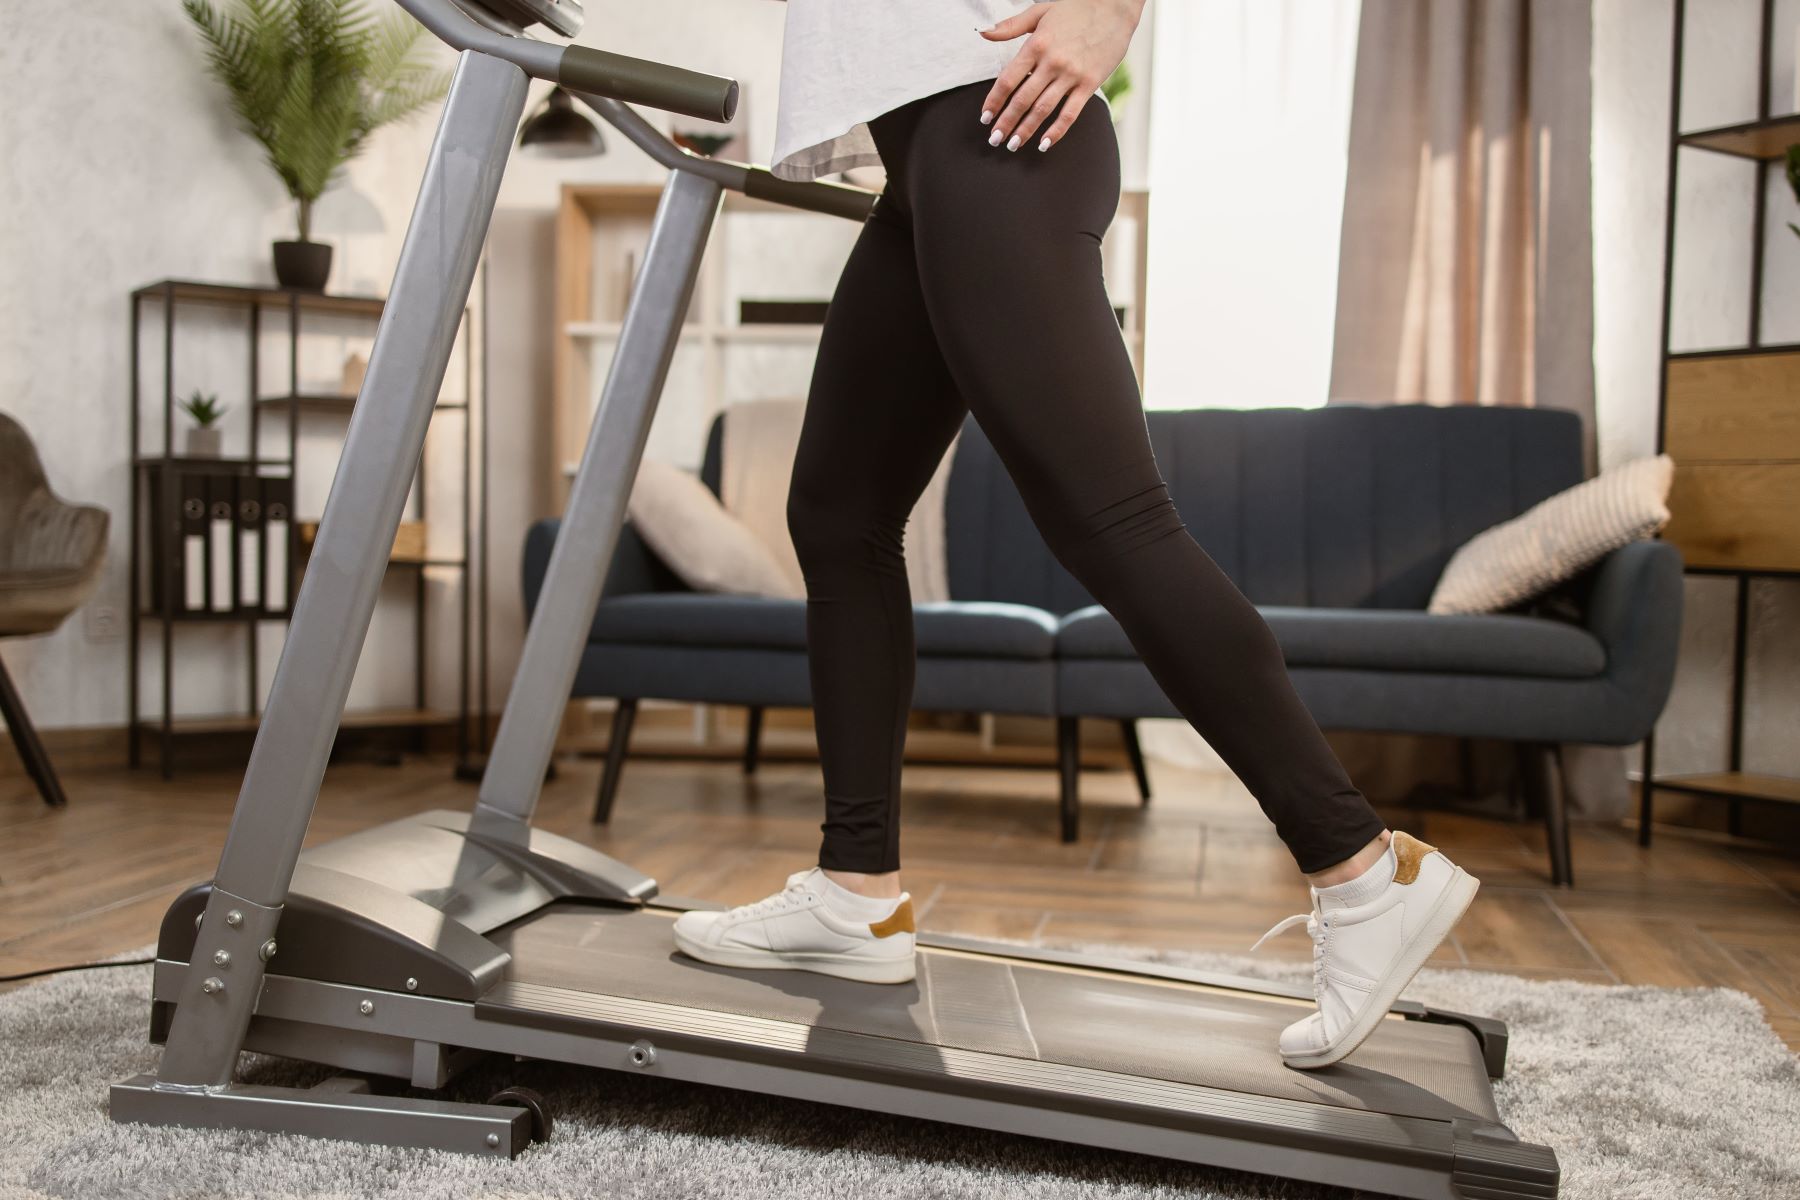 How To Use A Treadmill Without The Key